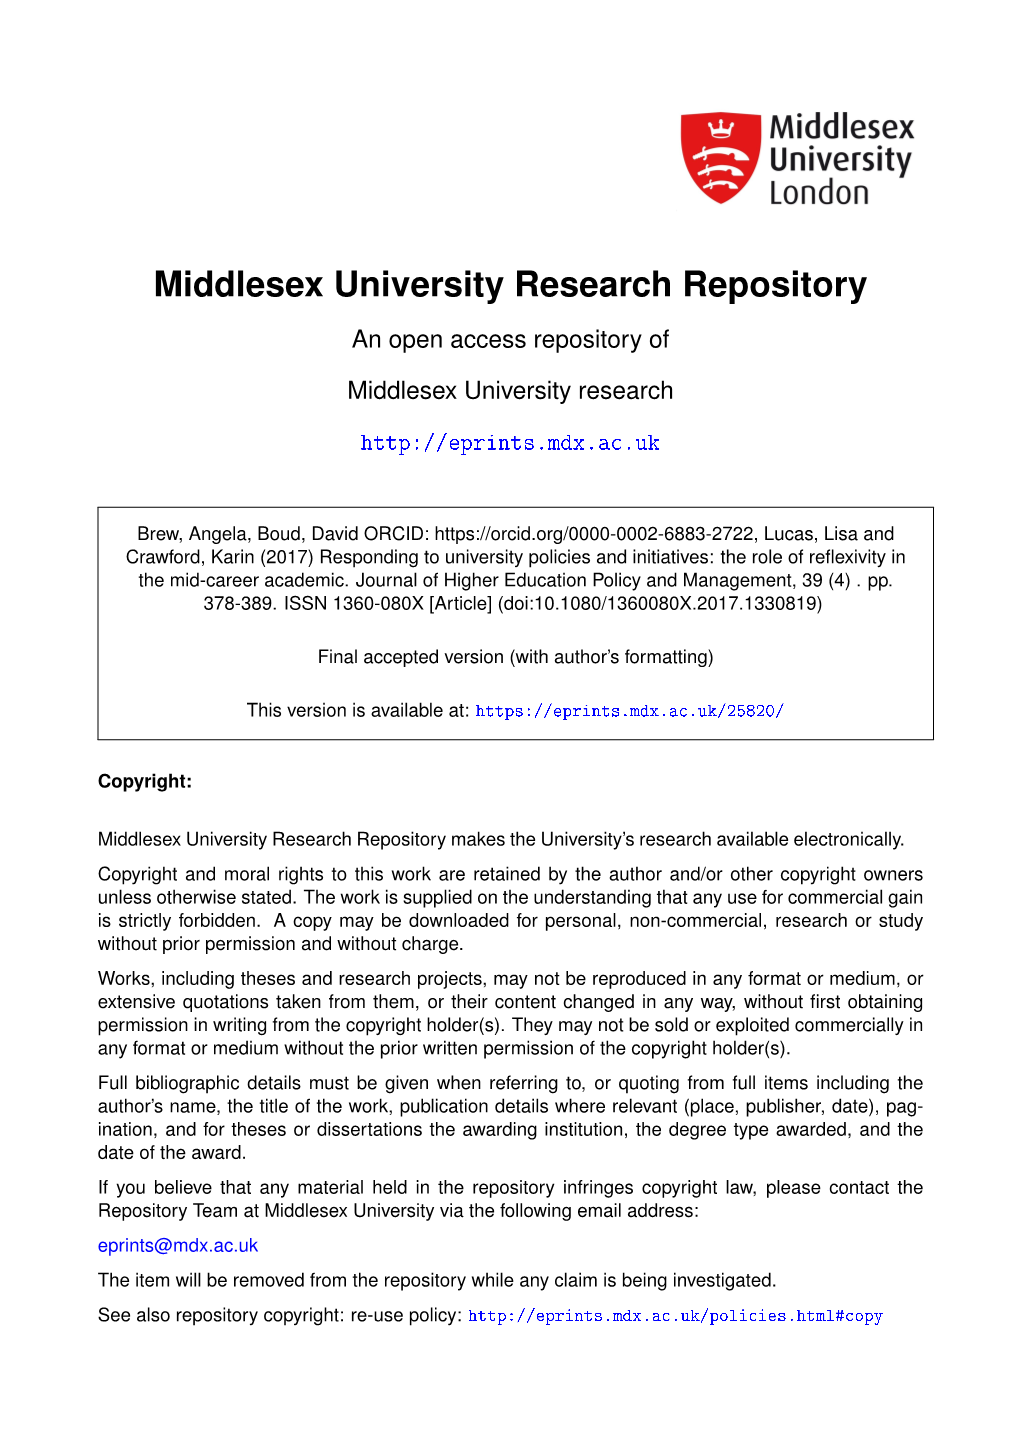 Responding to University Policies and Initiatives: the Role of Reflexivity in the Mid-Career Academic